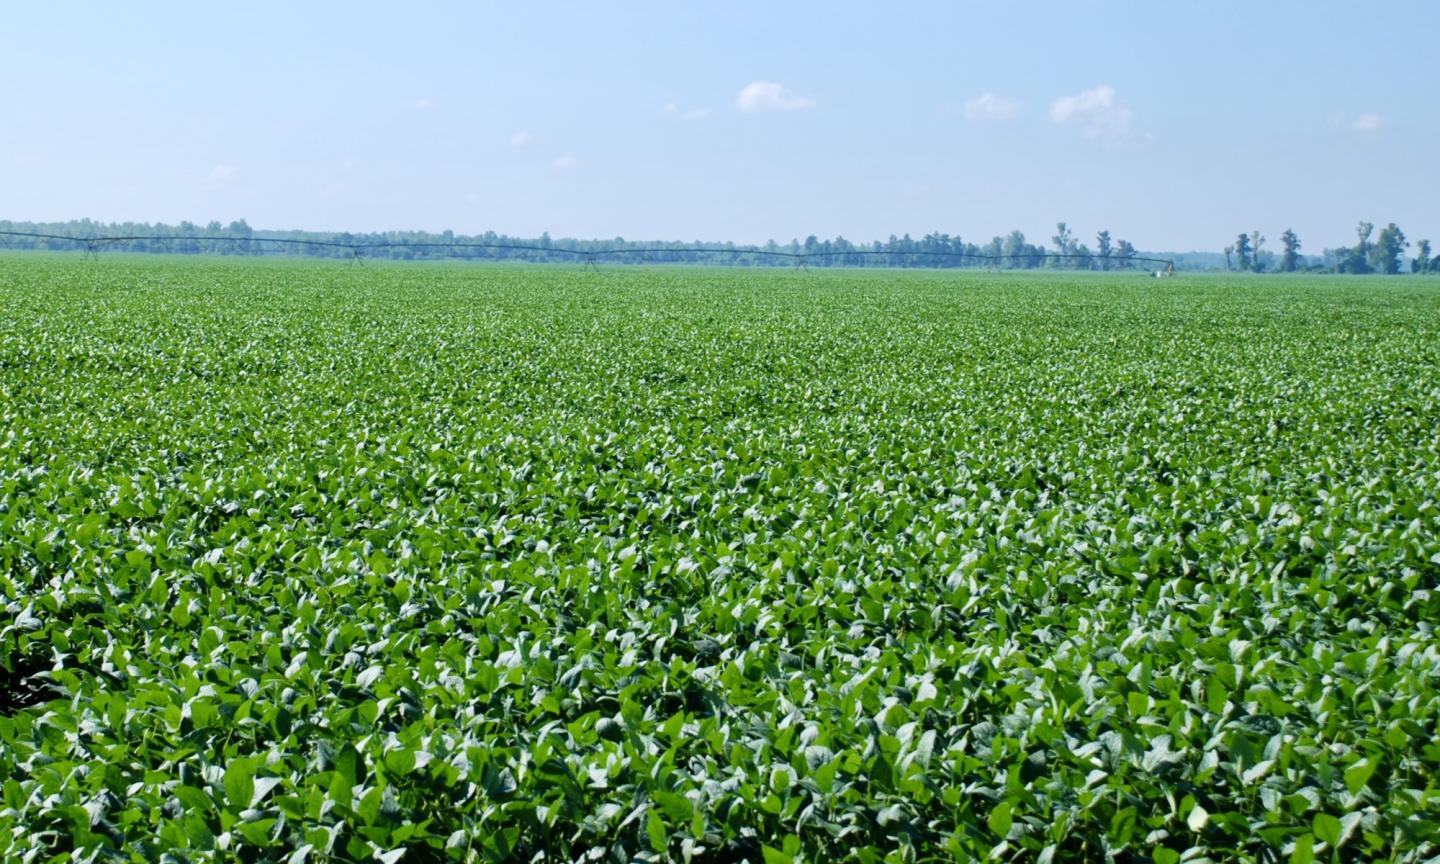 Picture of soybean fields